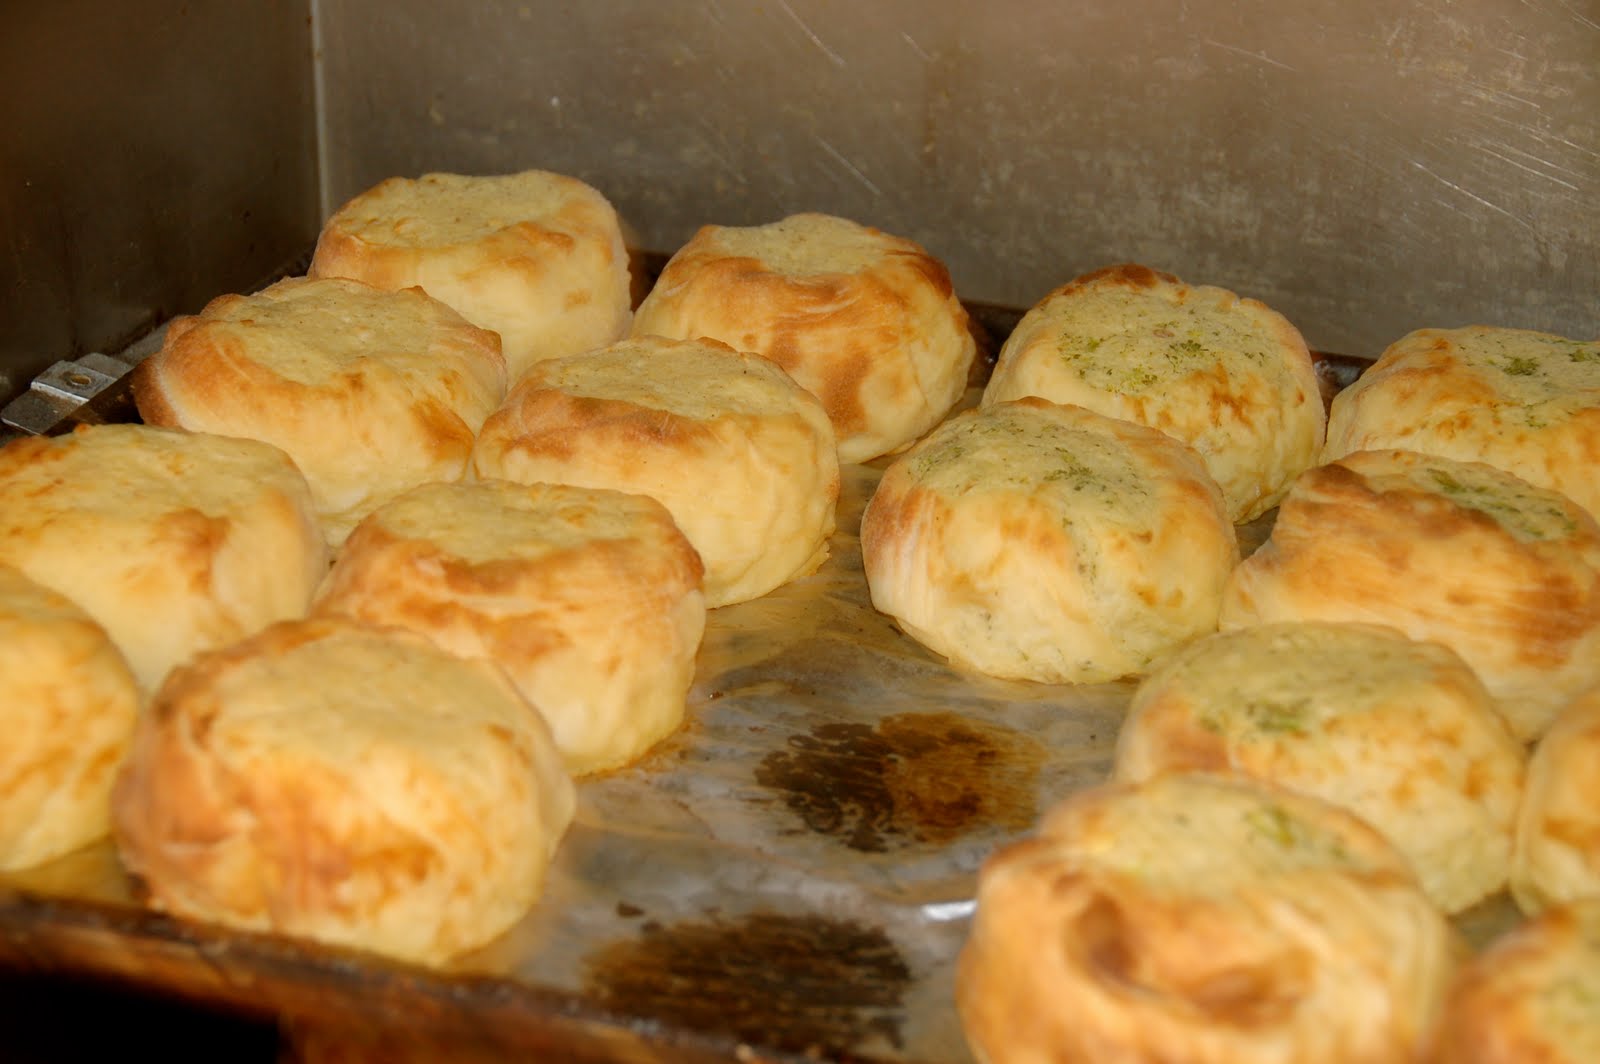 What is a knish?